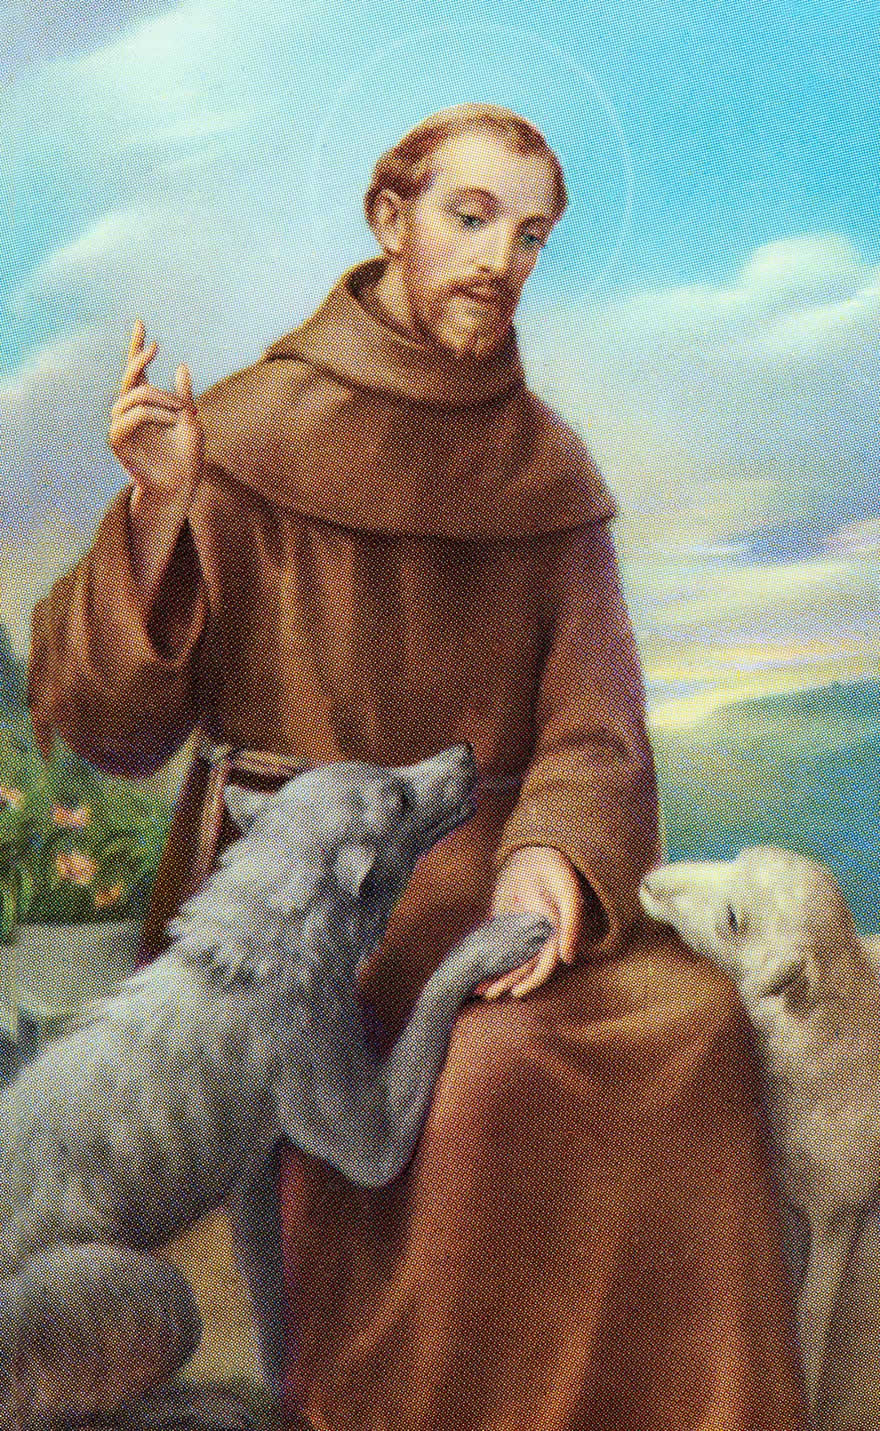 DAILY DEVOTION ON LITANY OF SAINT FRANCIS OF ASSISI.